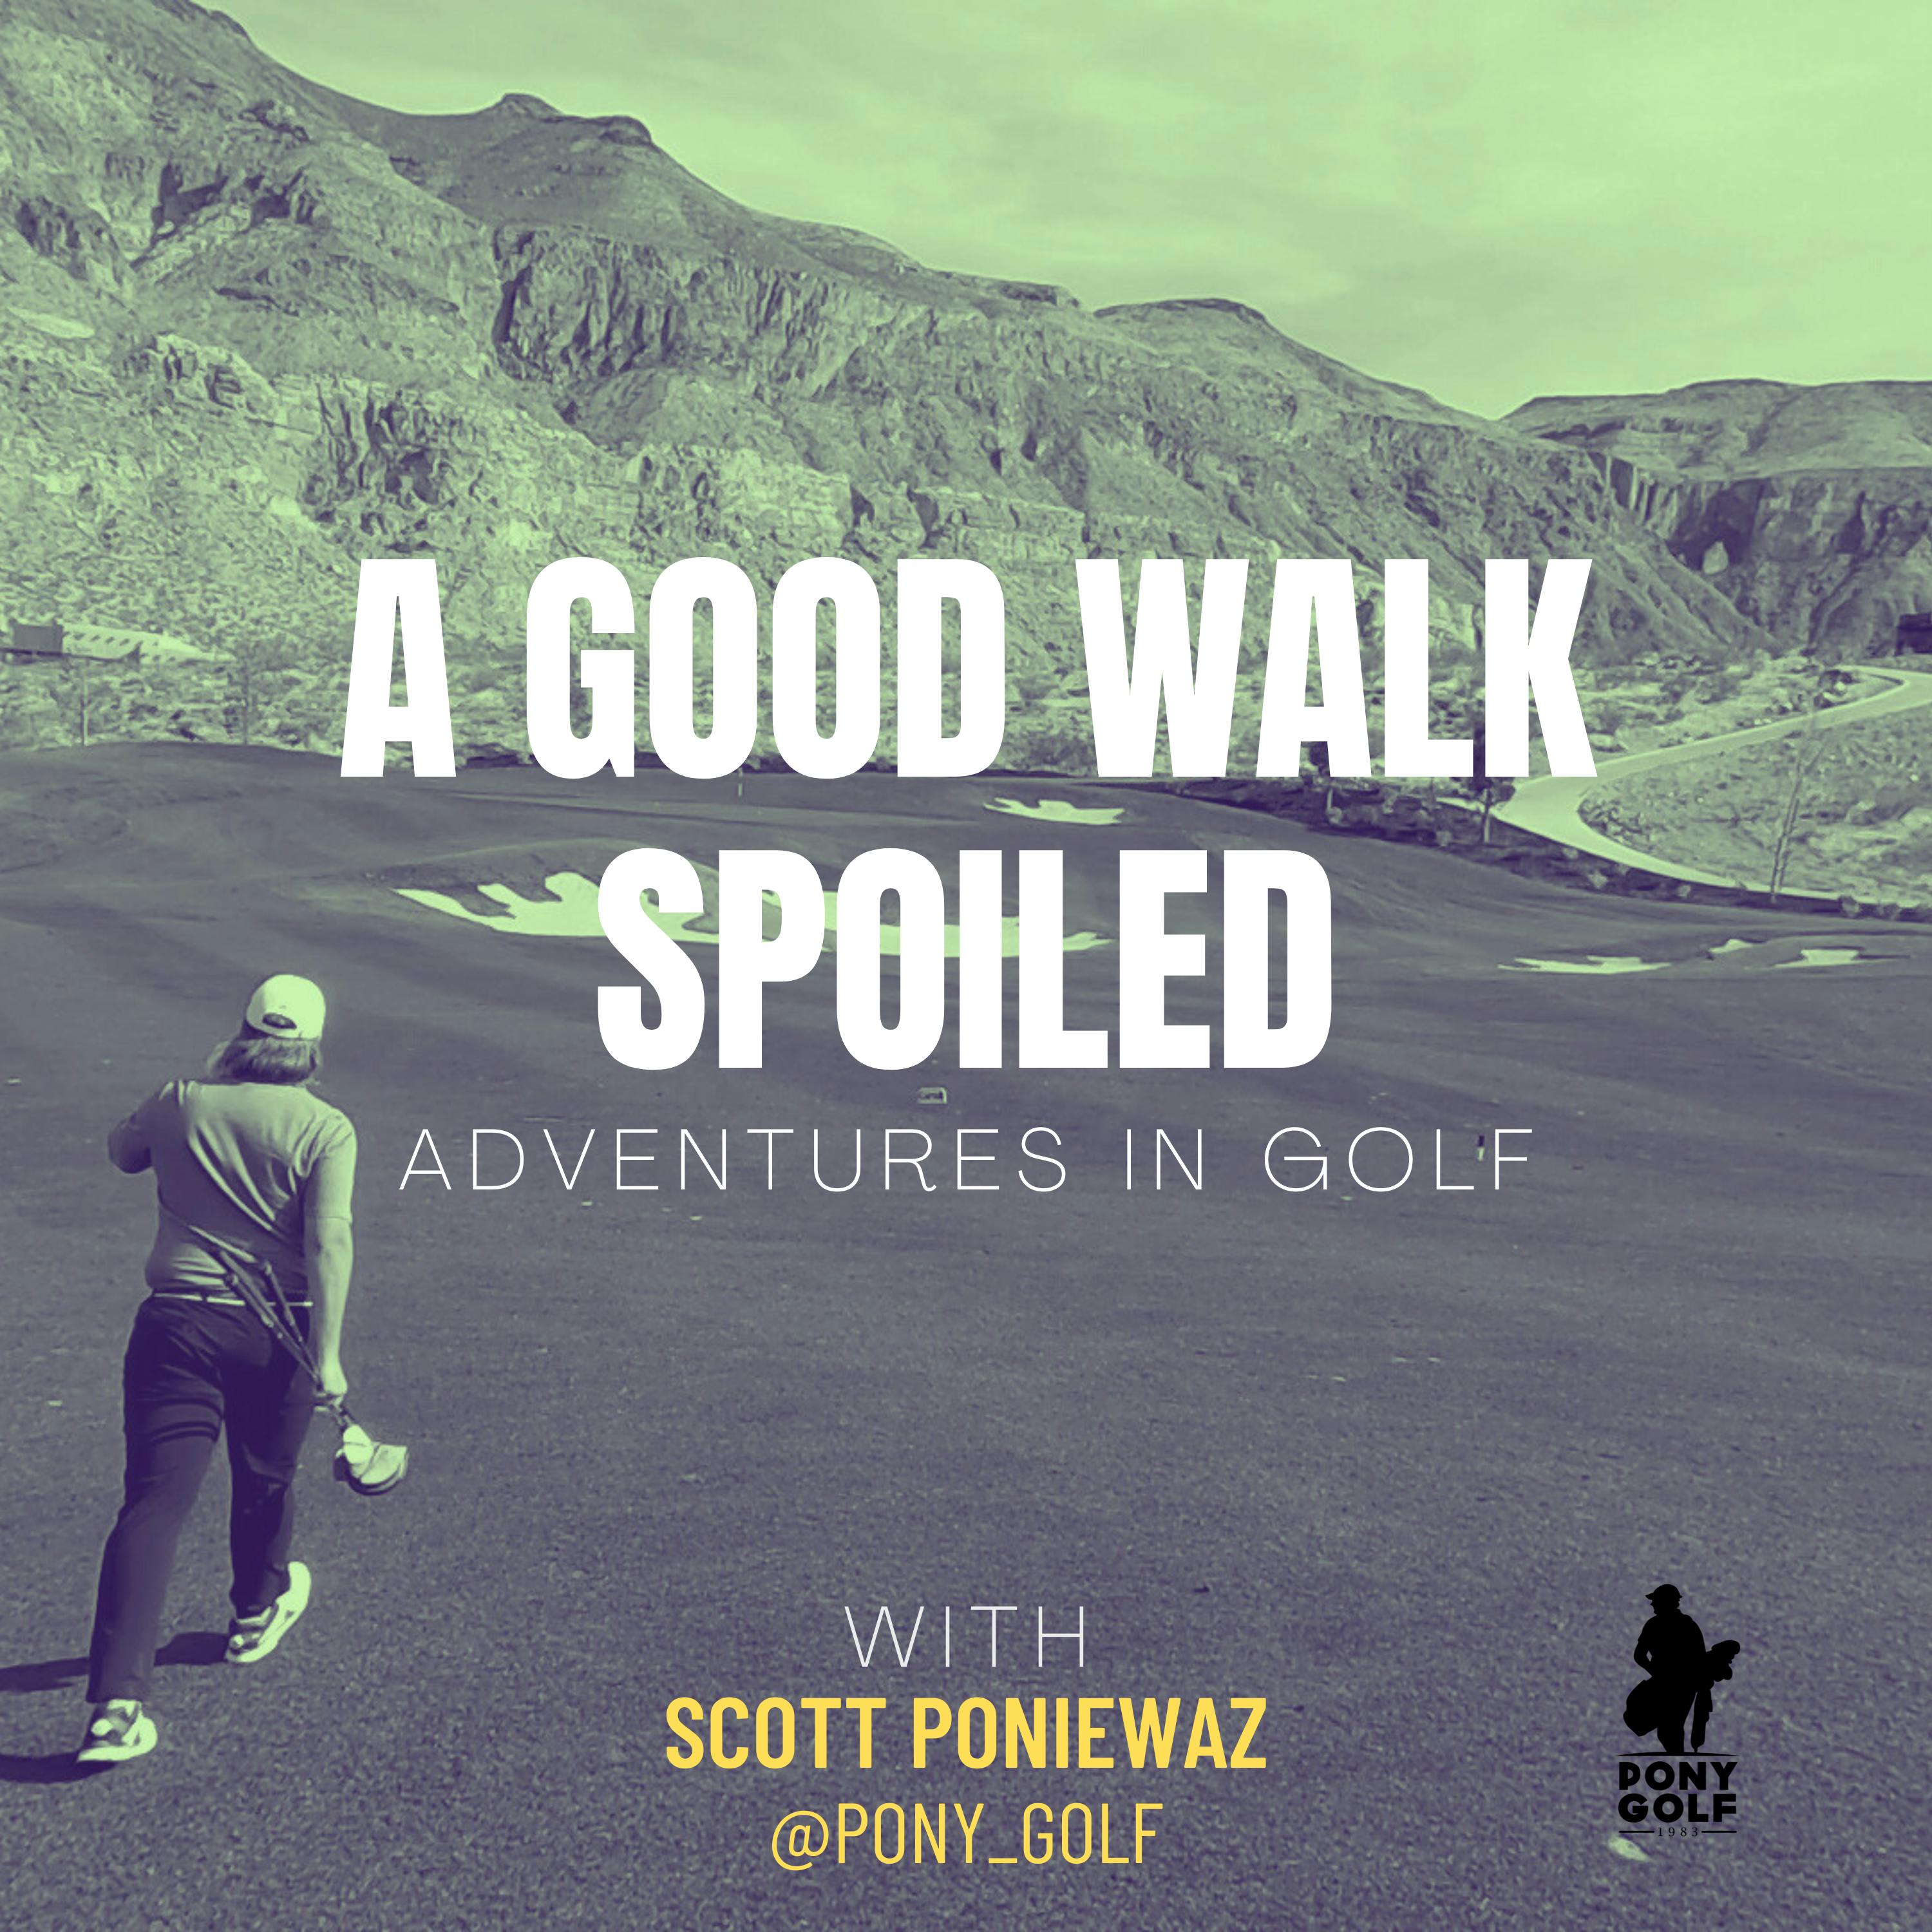 Phish, Grateful Dead & Golf with Jonathan Bogush | Guide to Seaview Golf Club - Home of The ShopRite LPGA Classic